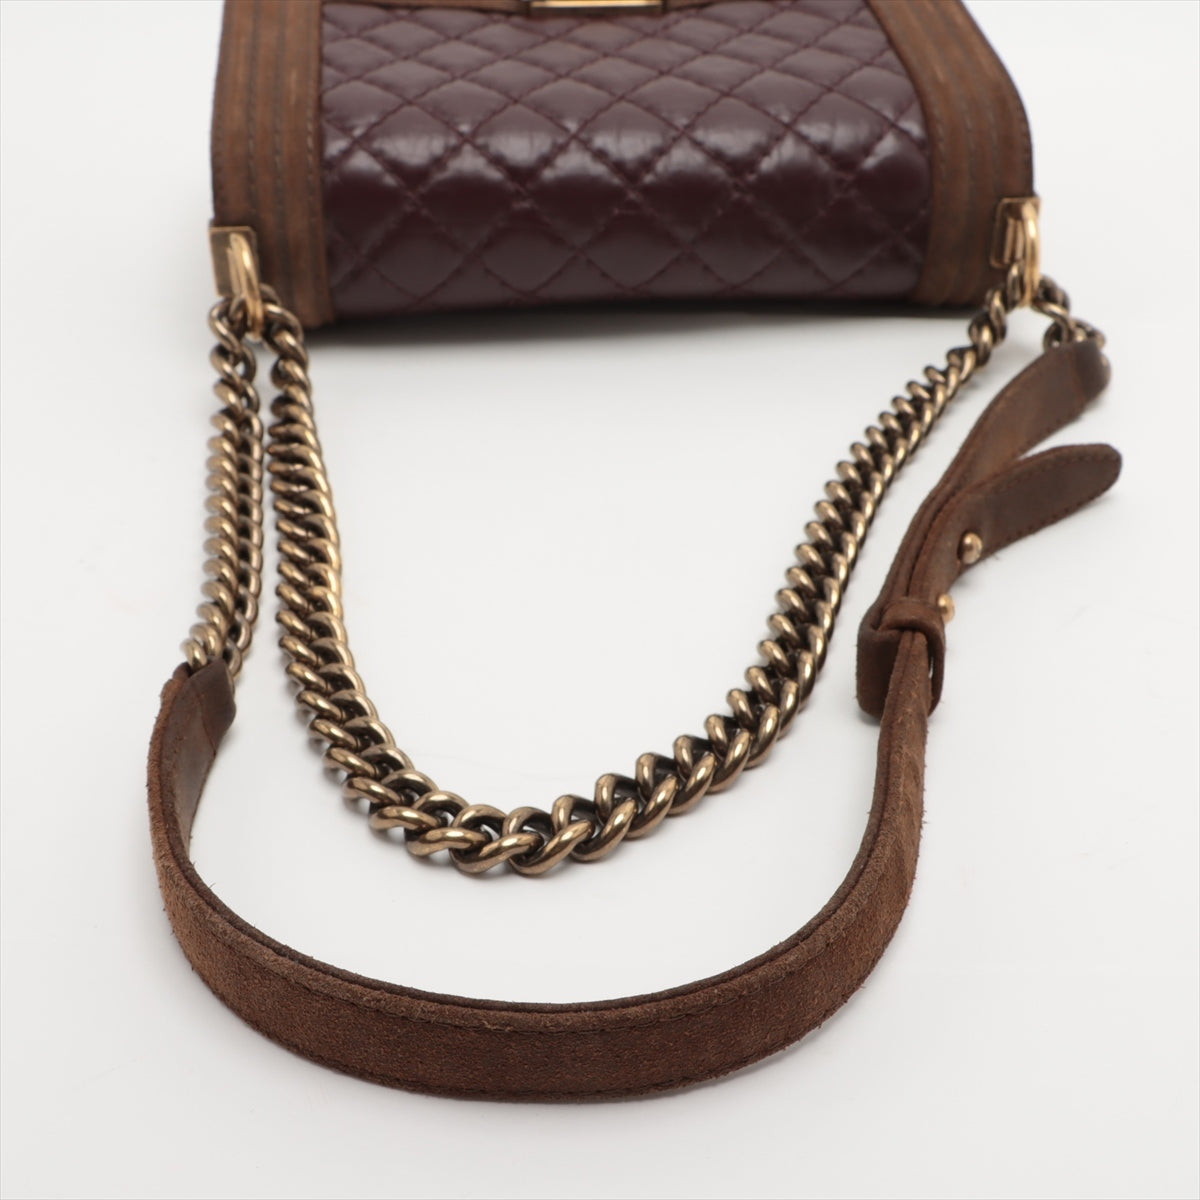 Chanel Boy Chanel Leather & suede Chain shoulder bag Bordeaux x brown Gold Metal fittings 18189566